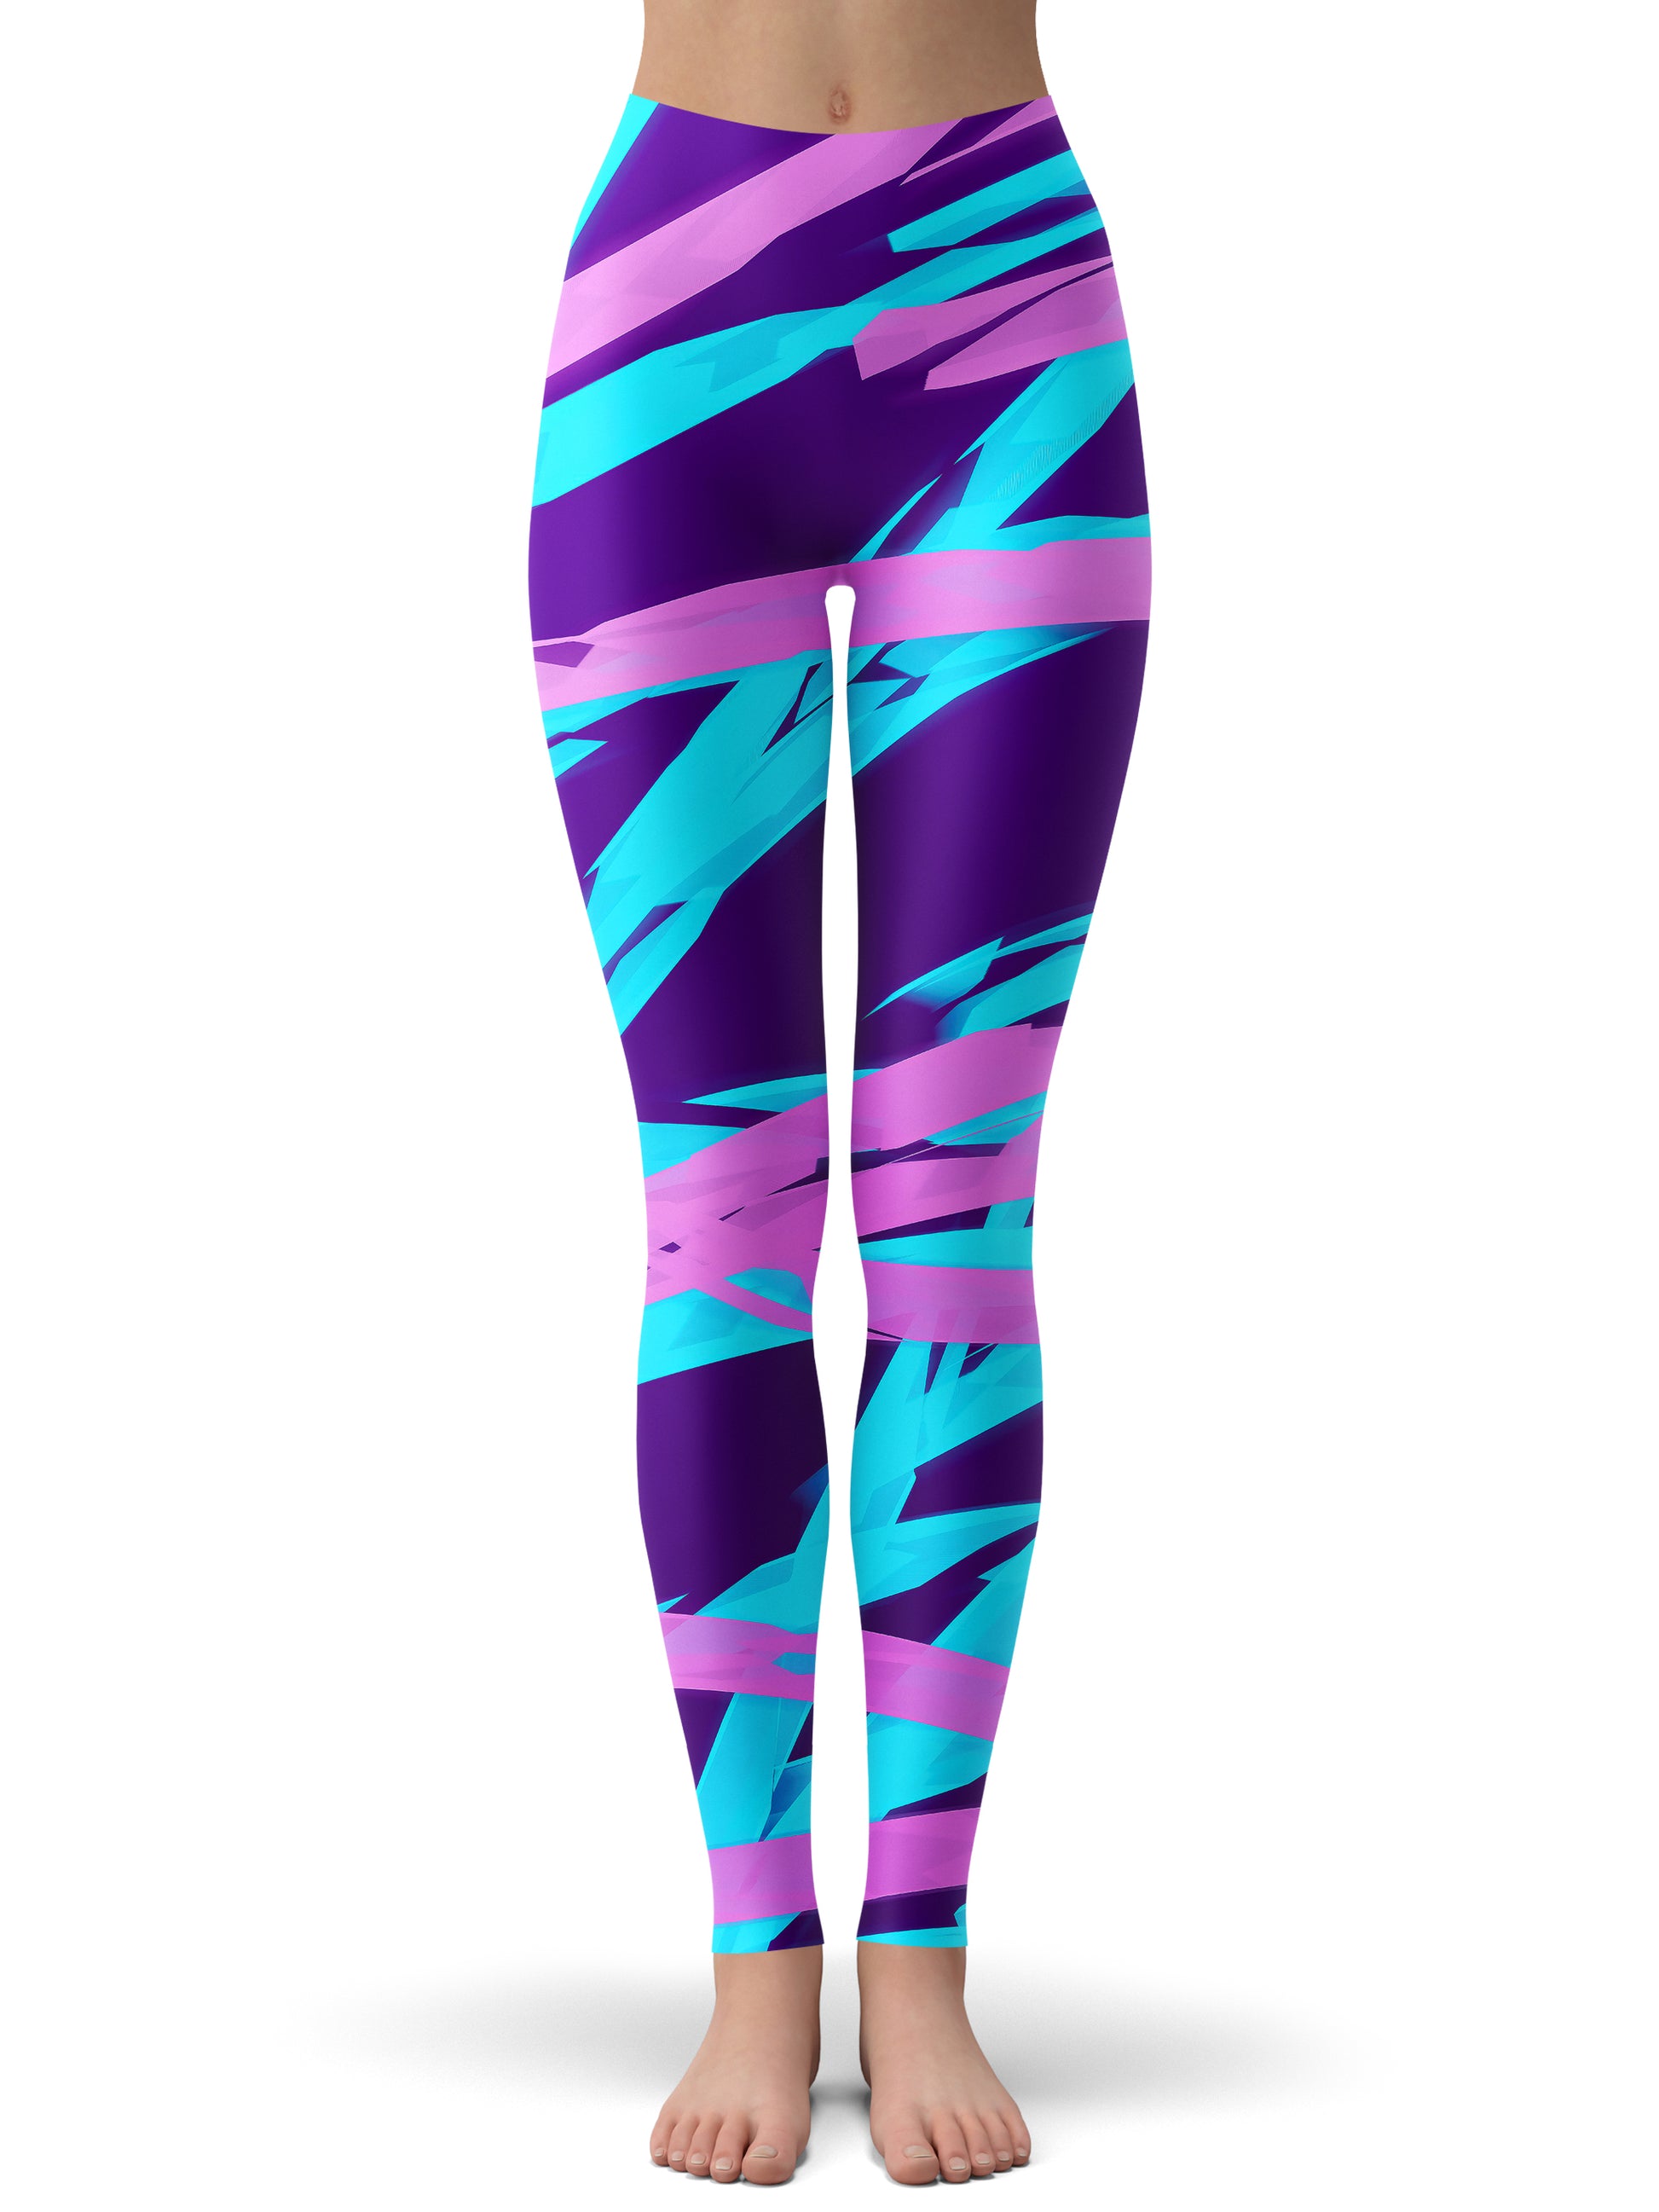 Purple and Blue Rave Abstract Women's Tank and Leggings Combo, Big Tex Funkadelic, | iEDM